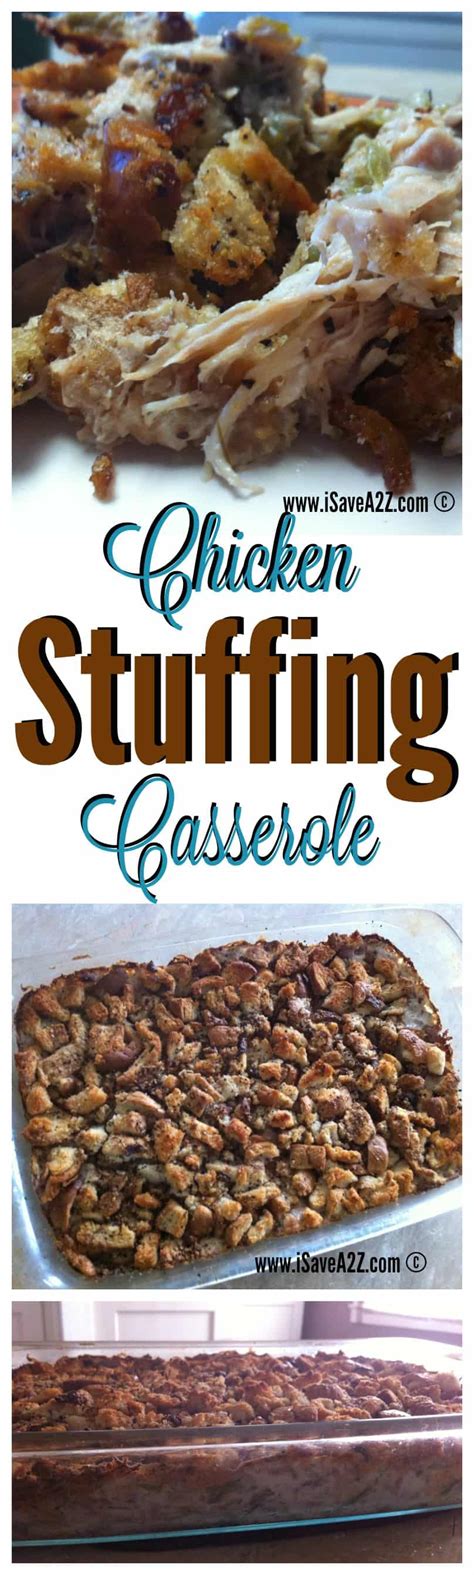 Toss to coat the stuffing mix in the butter. Chicken Stuffing Casserole Bake Recipe - iSaveA2Z.com